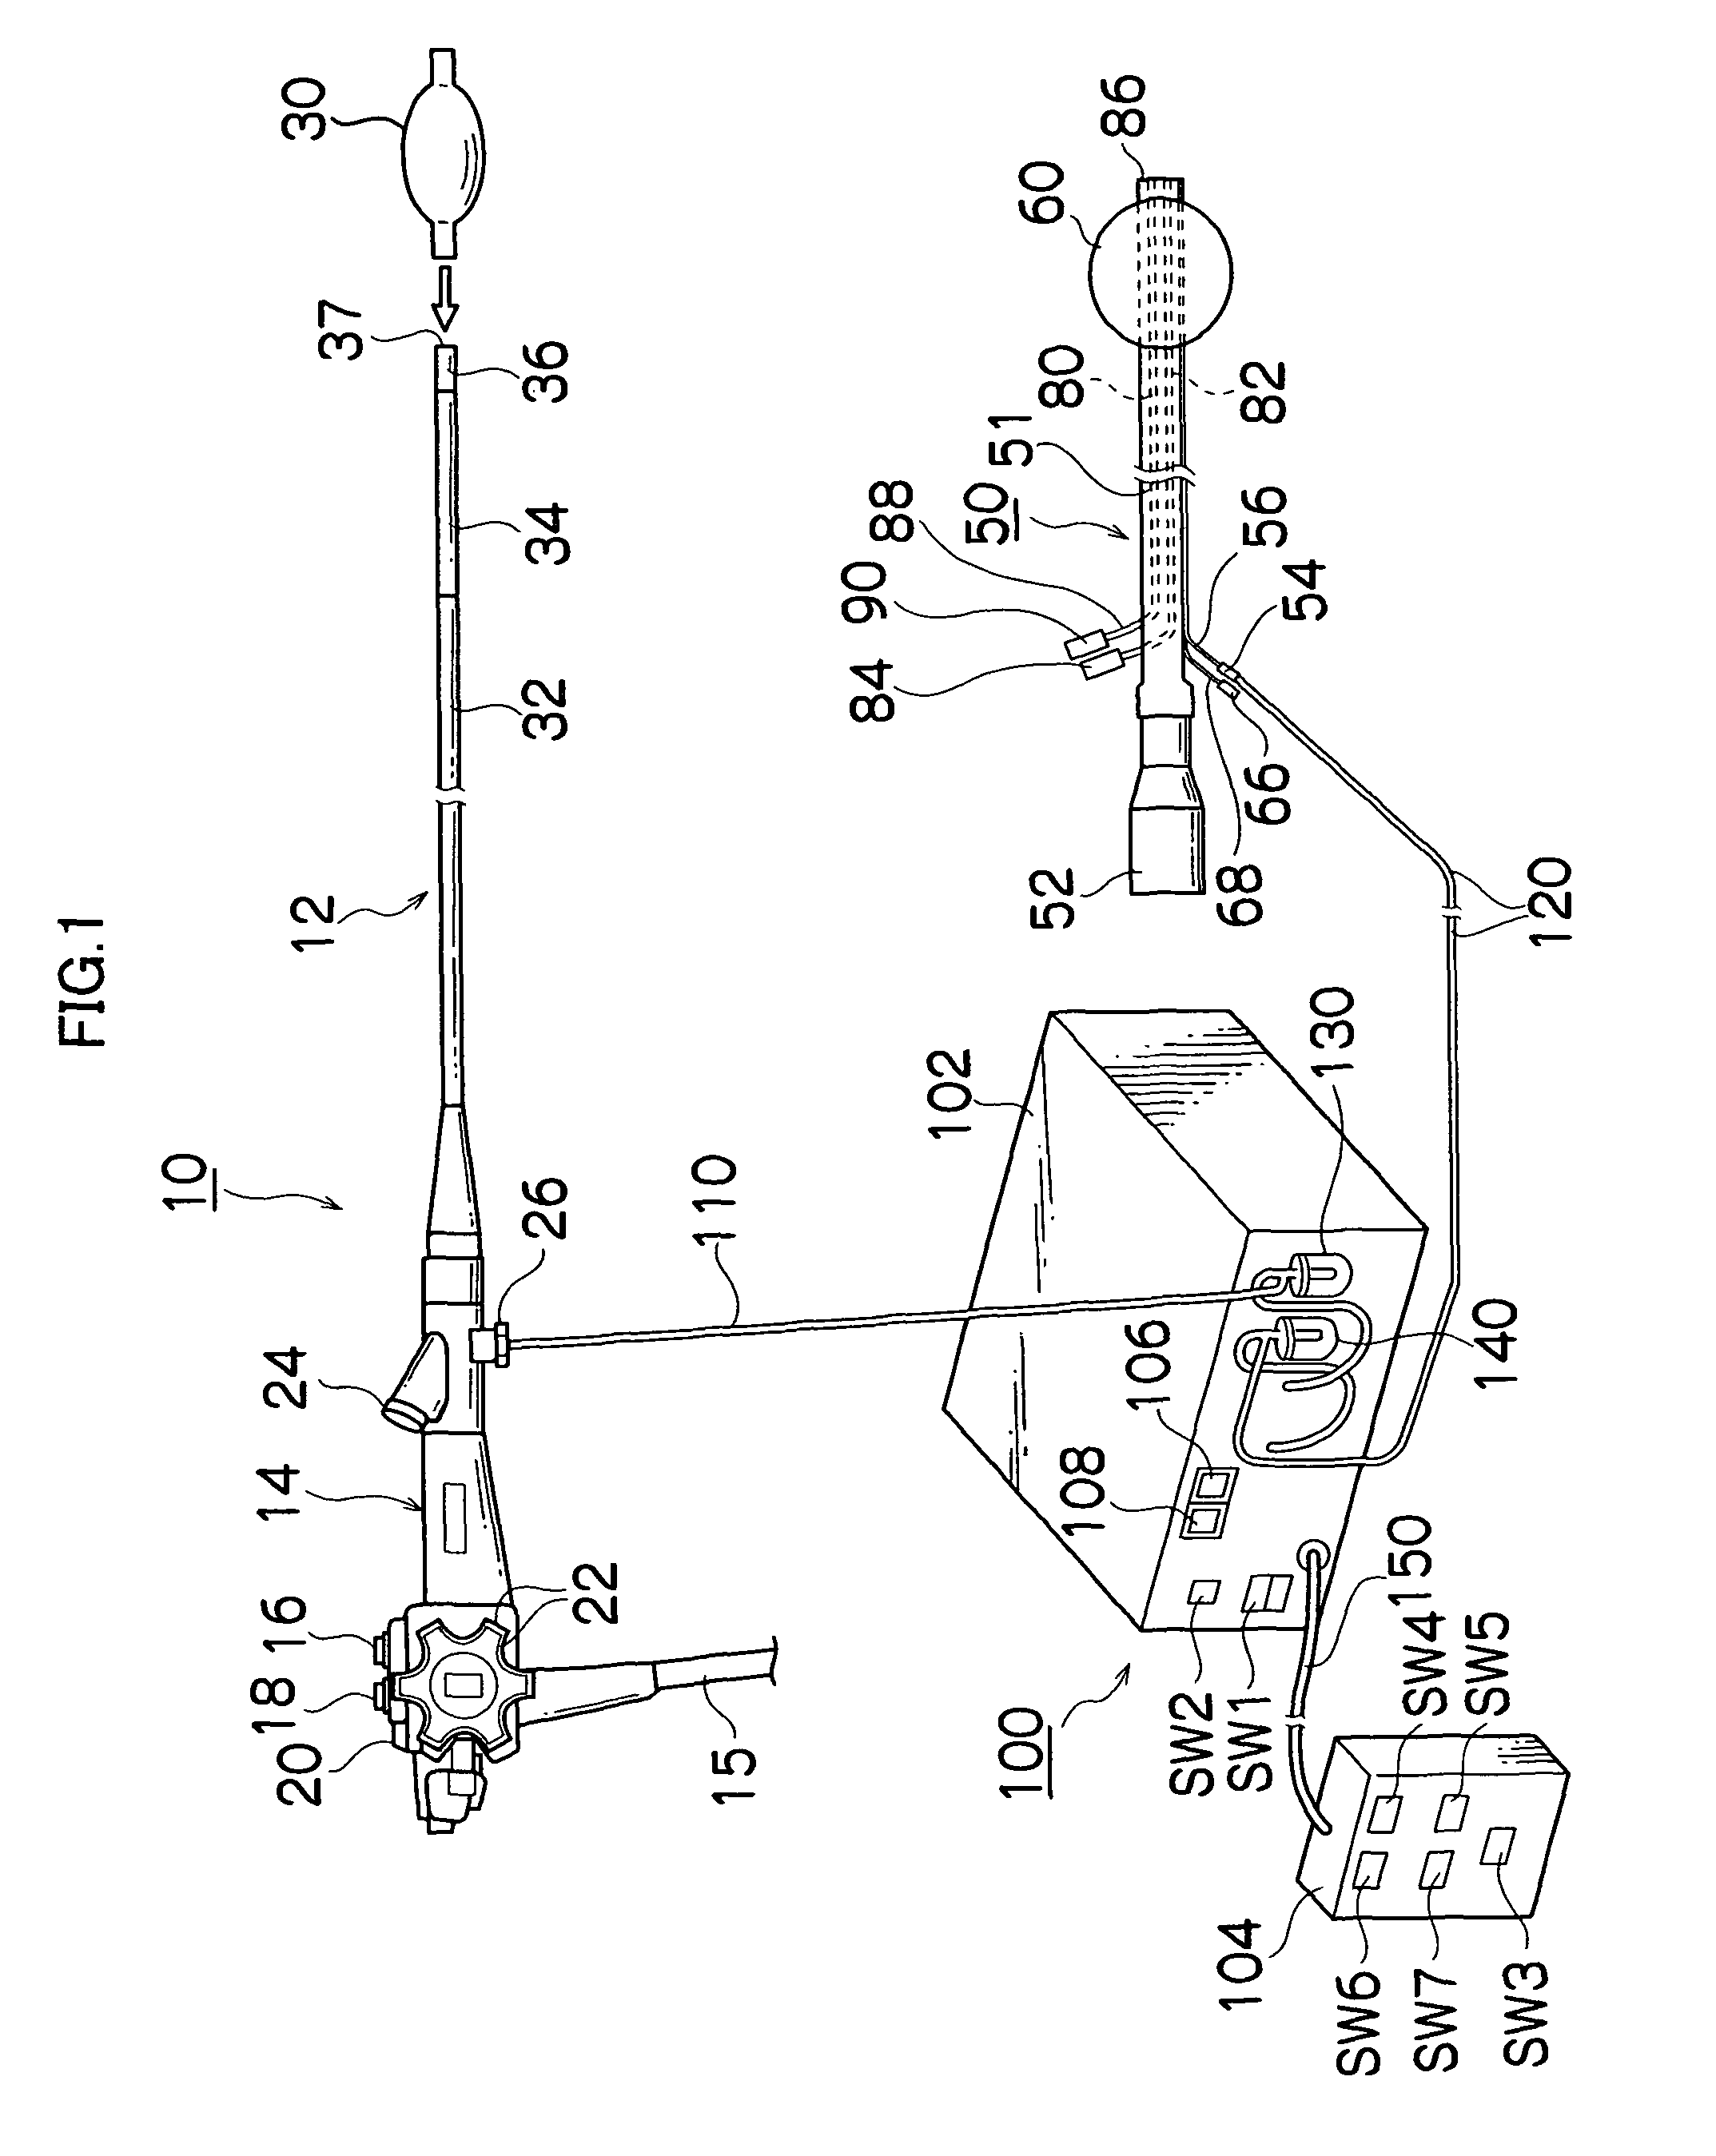 Insertion assisting tool for endoscope and endoscope operating method